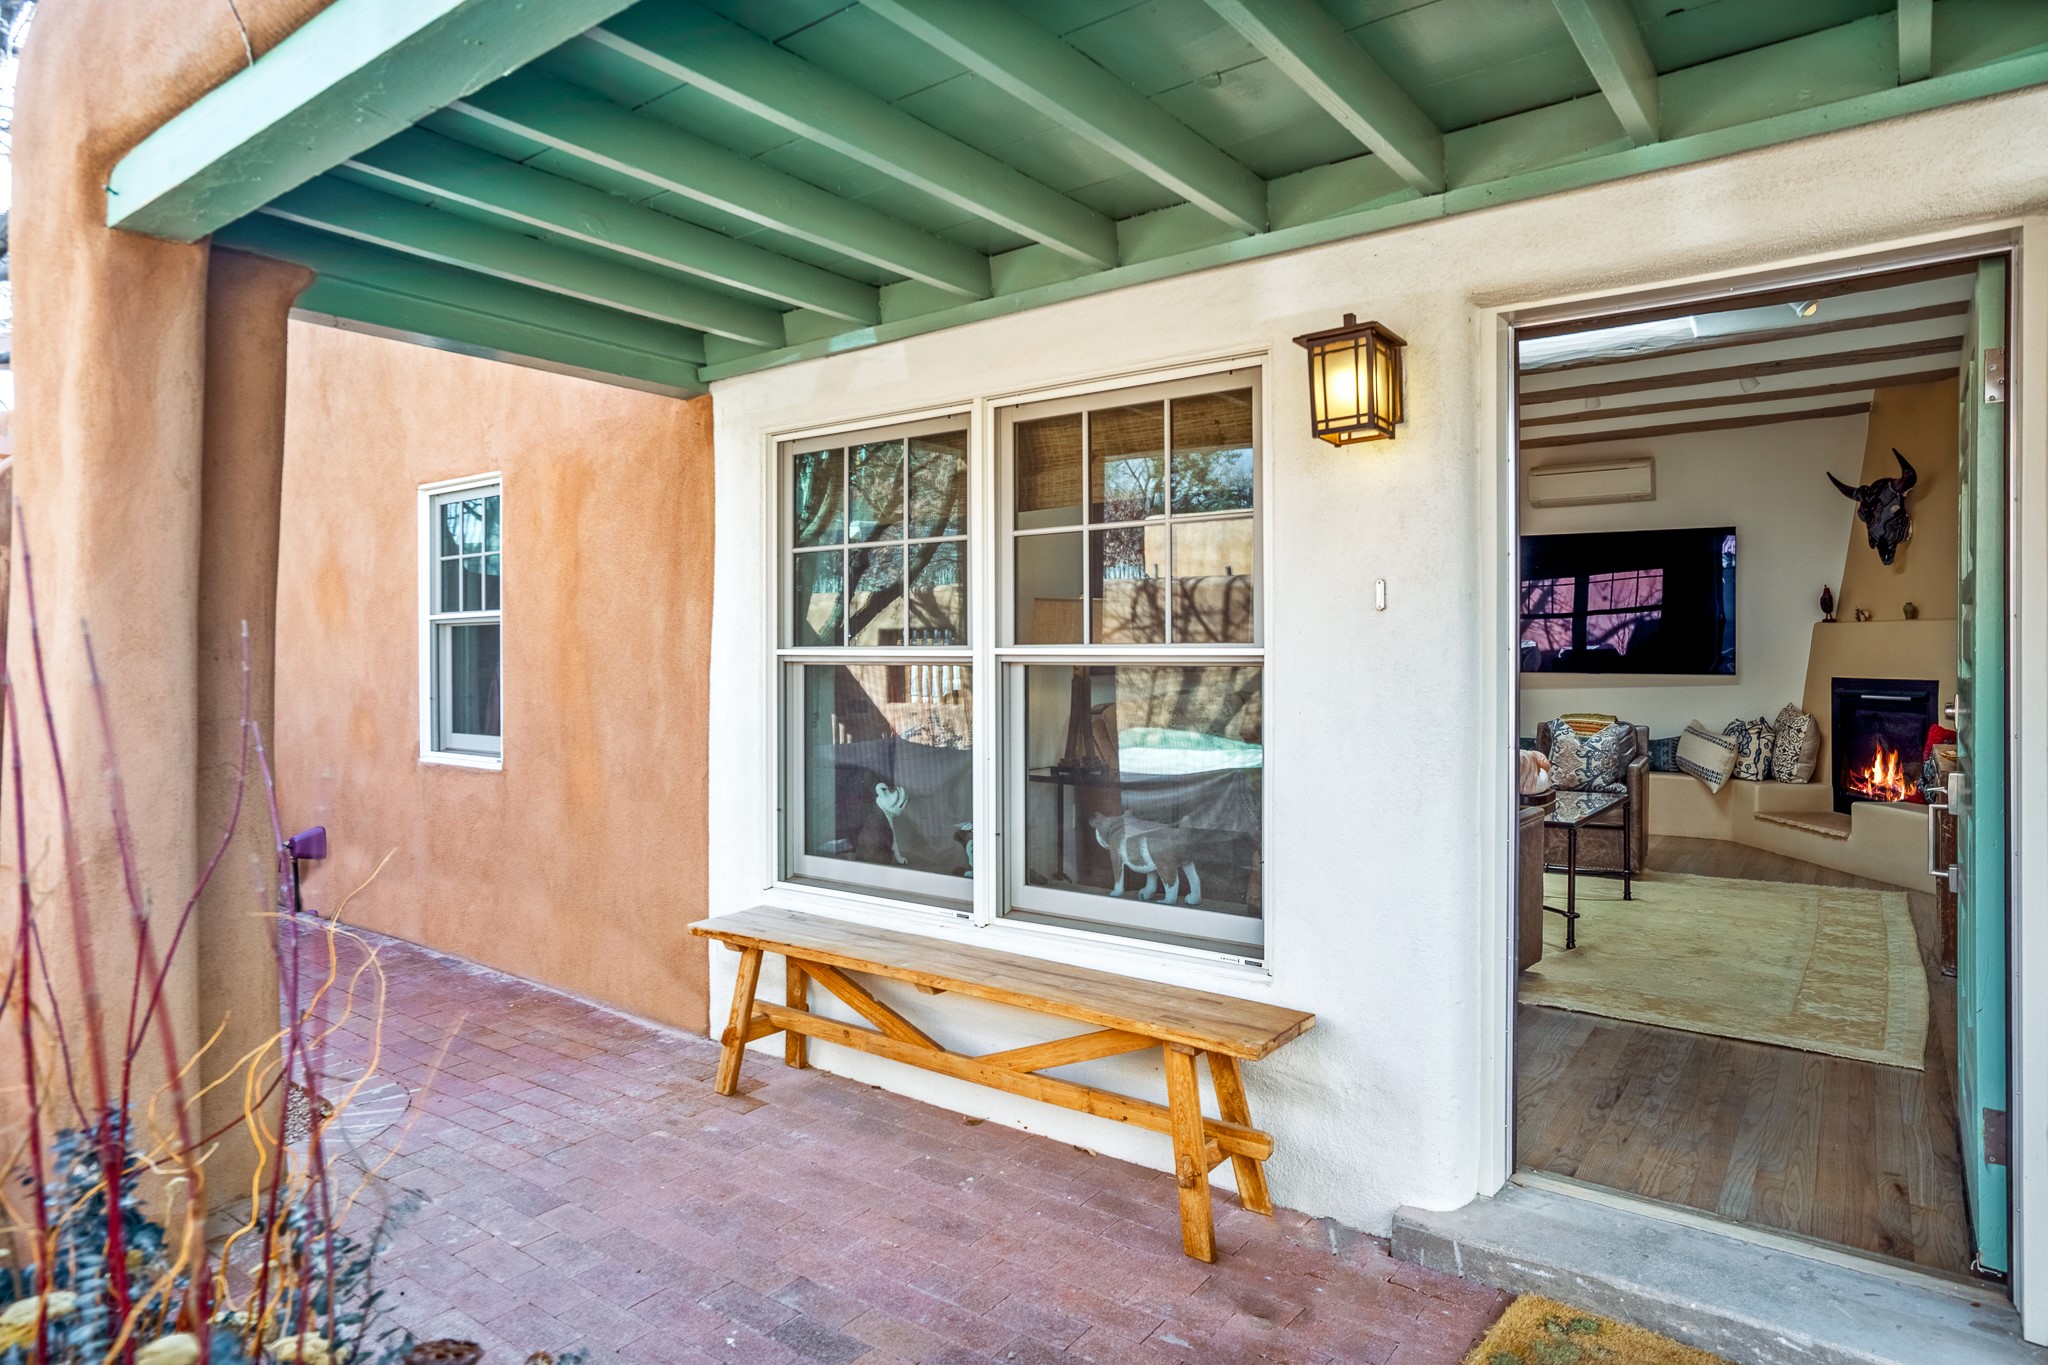 512 Acequia Madre C, Santa Fe, New Mexico 87505, 2 Bedrooms Bedrooms, ,3 BathroomsBathrooms,Residential,For Sale,512 Acequia Madre C,202334853